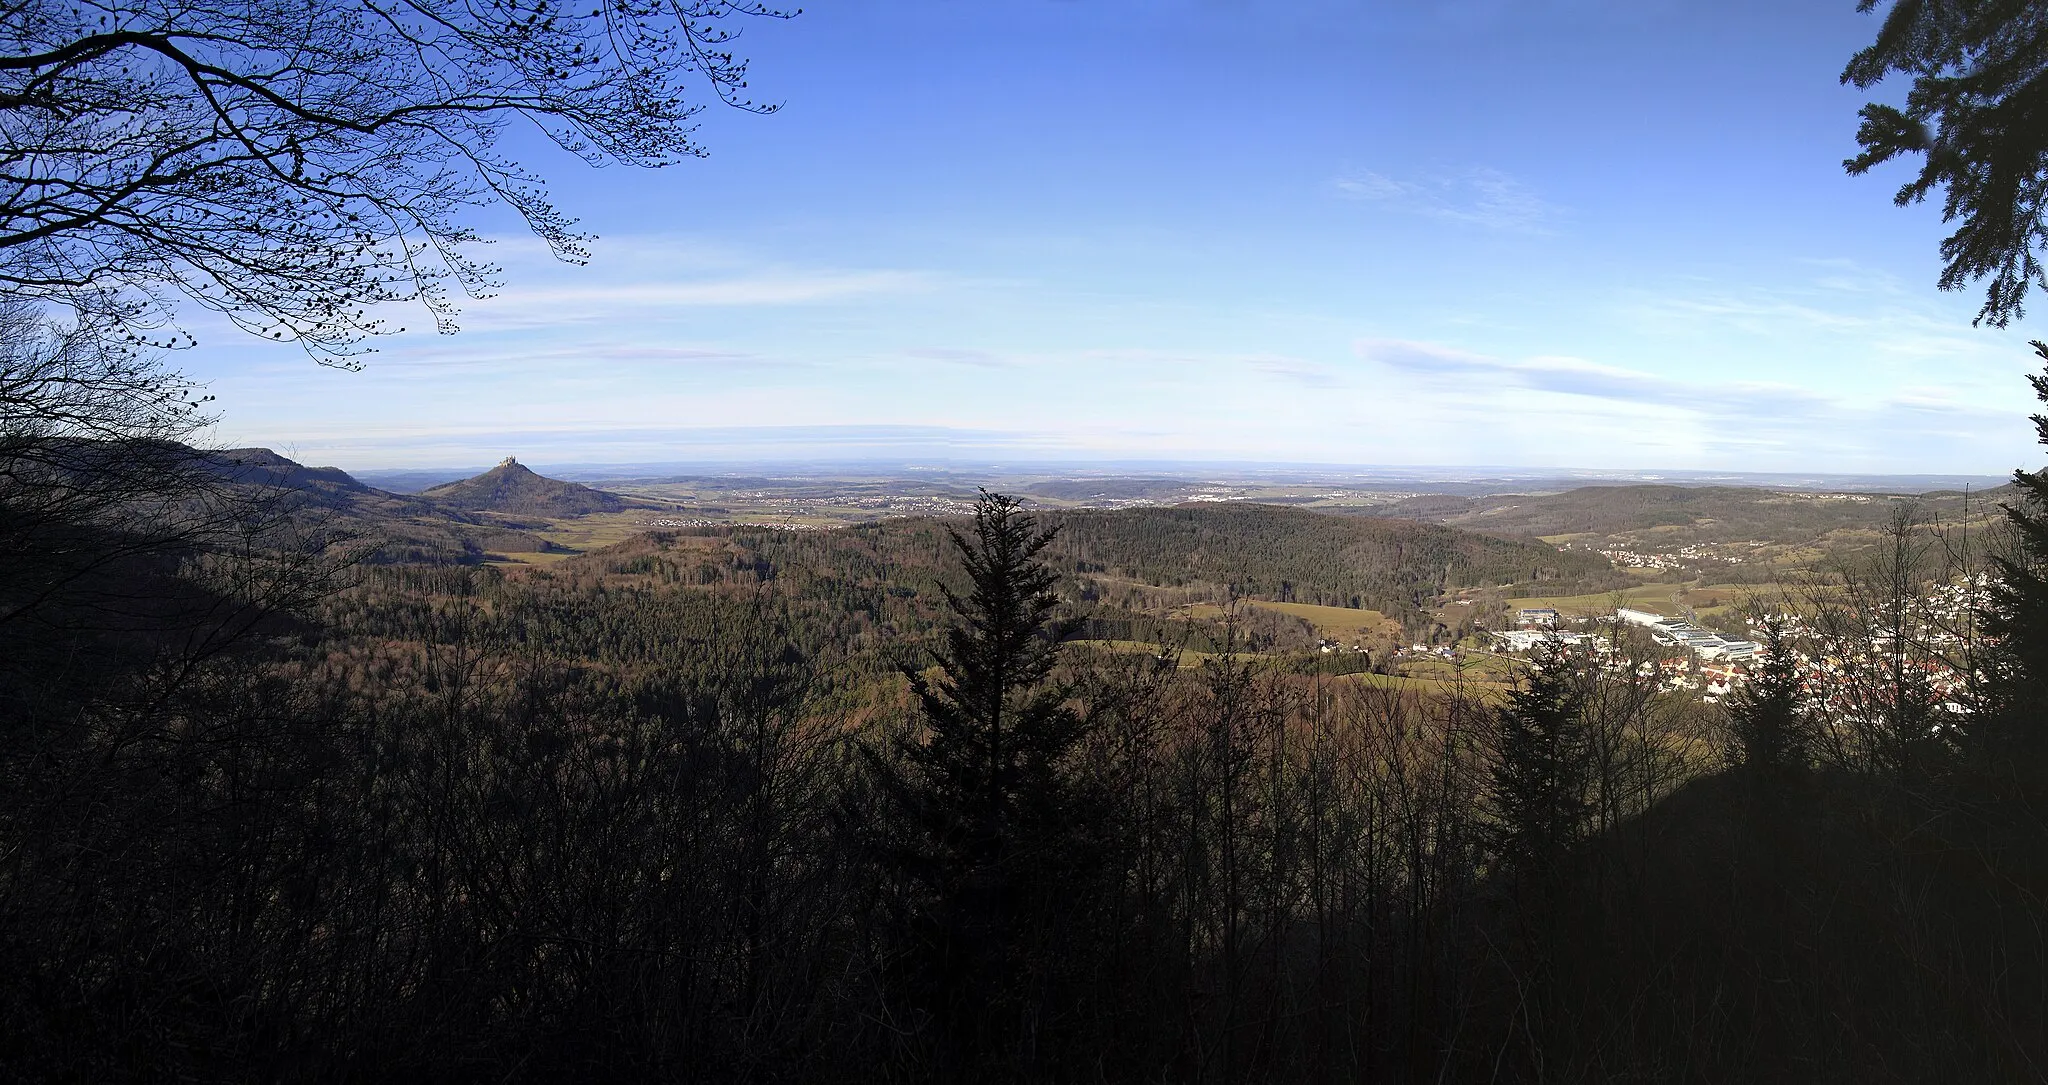 Photo showing: Himberg (854m), Swabian Alb mountains with Hohenzollern Castle, Zollernalbkreis Germany - panoramic view